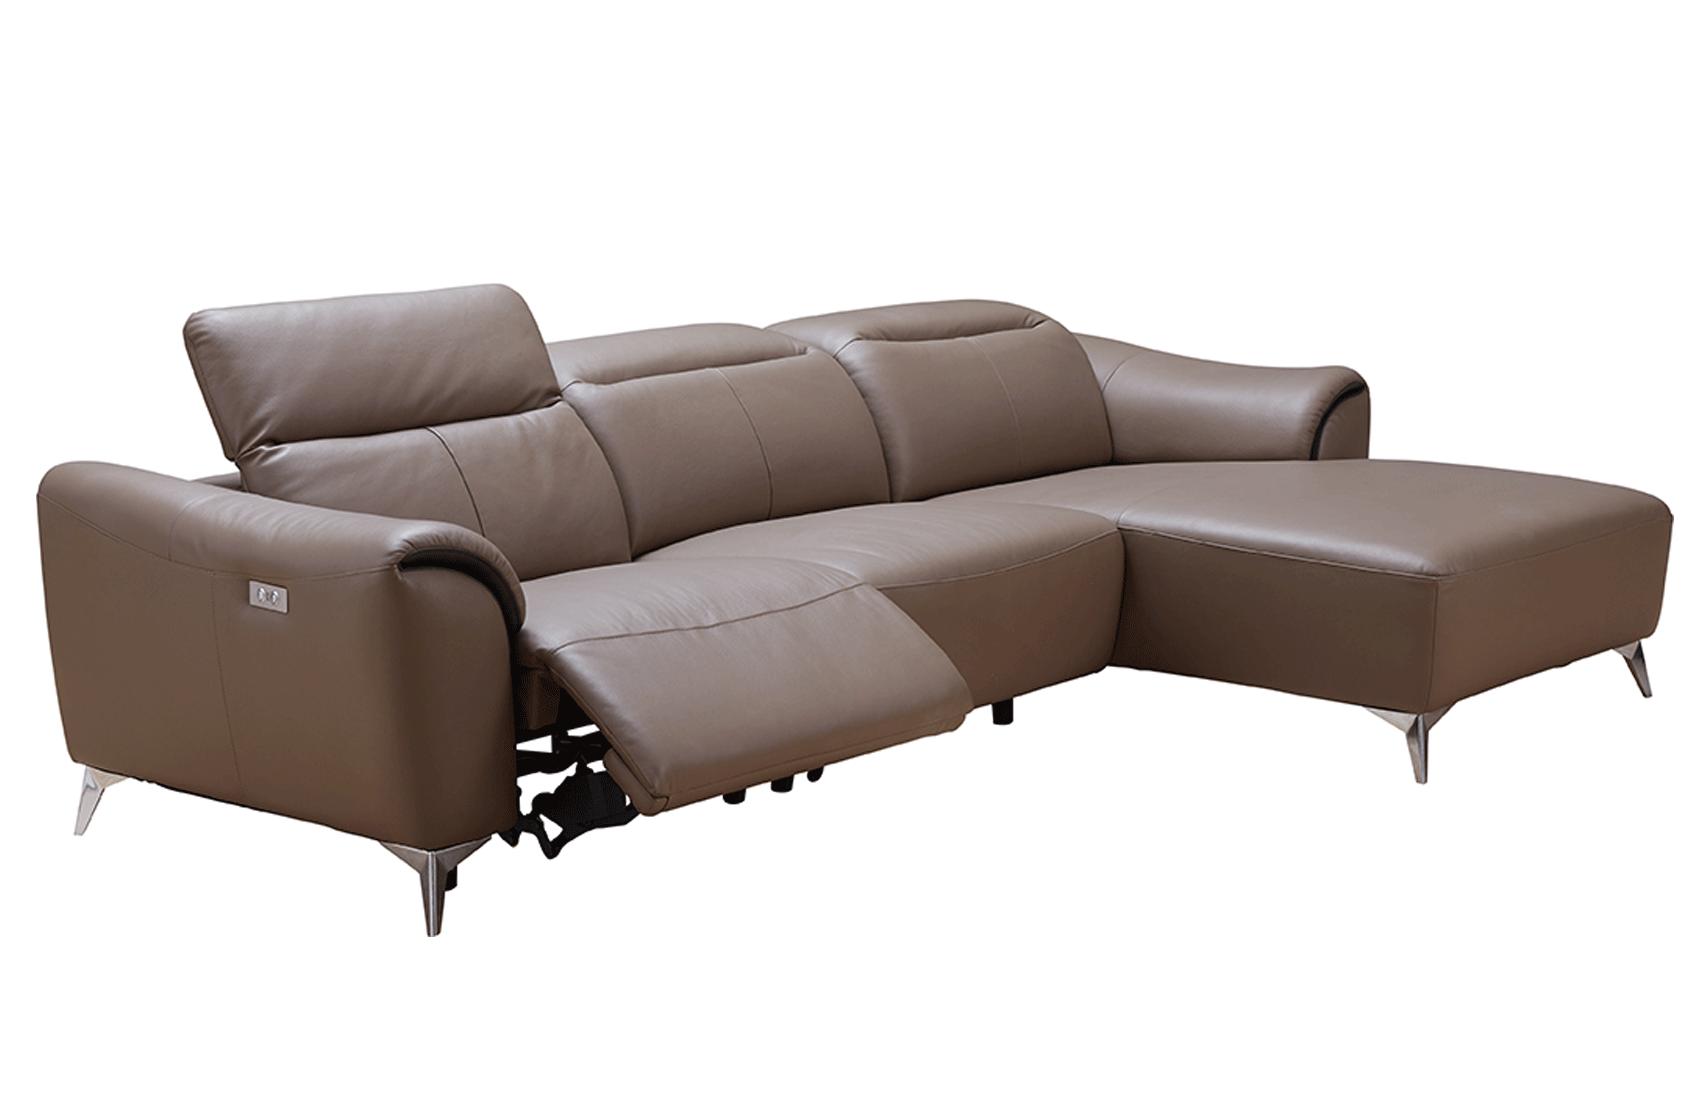 Contemporary, Modern Reclining Sectional 950 950SECTIONALRIGHT in Light Brown Top-grain Leather